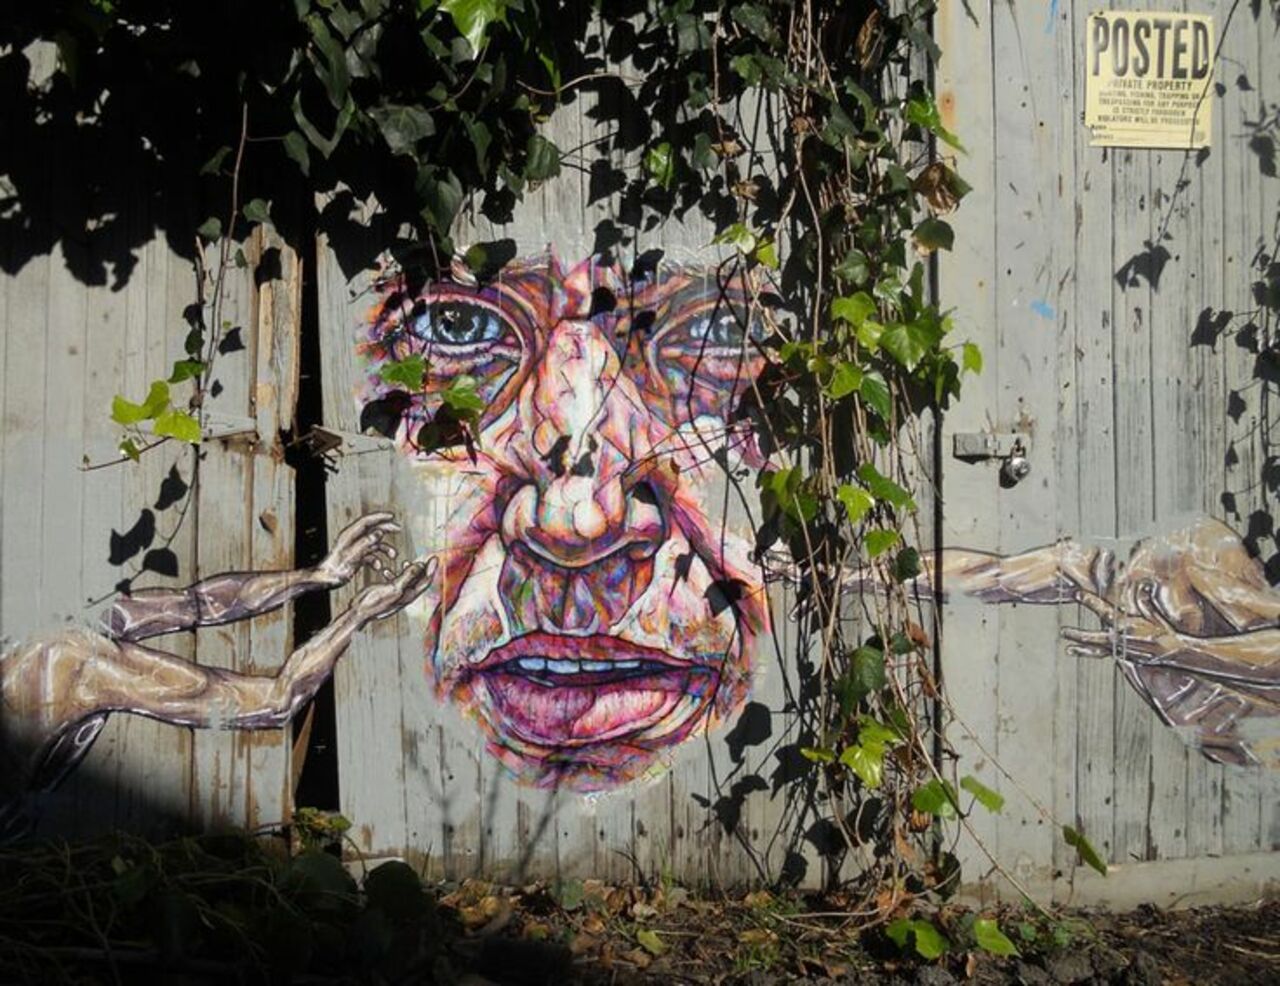 Hiding in the leaves. Find the best #streetart merged with nature: http://bit.ly/1rNbrXm #artlovers #graffiti https://t.co/5sEM64w6fU